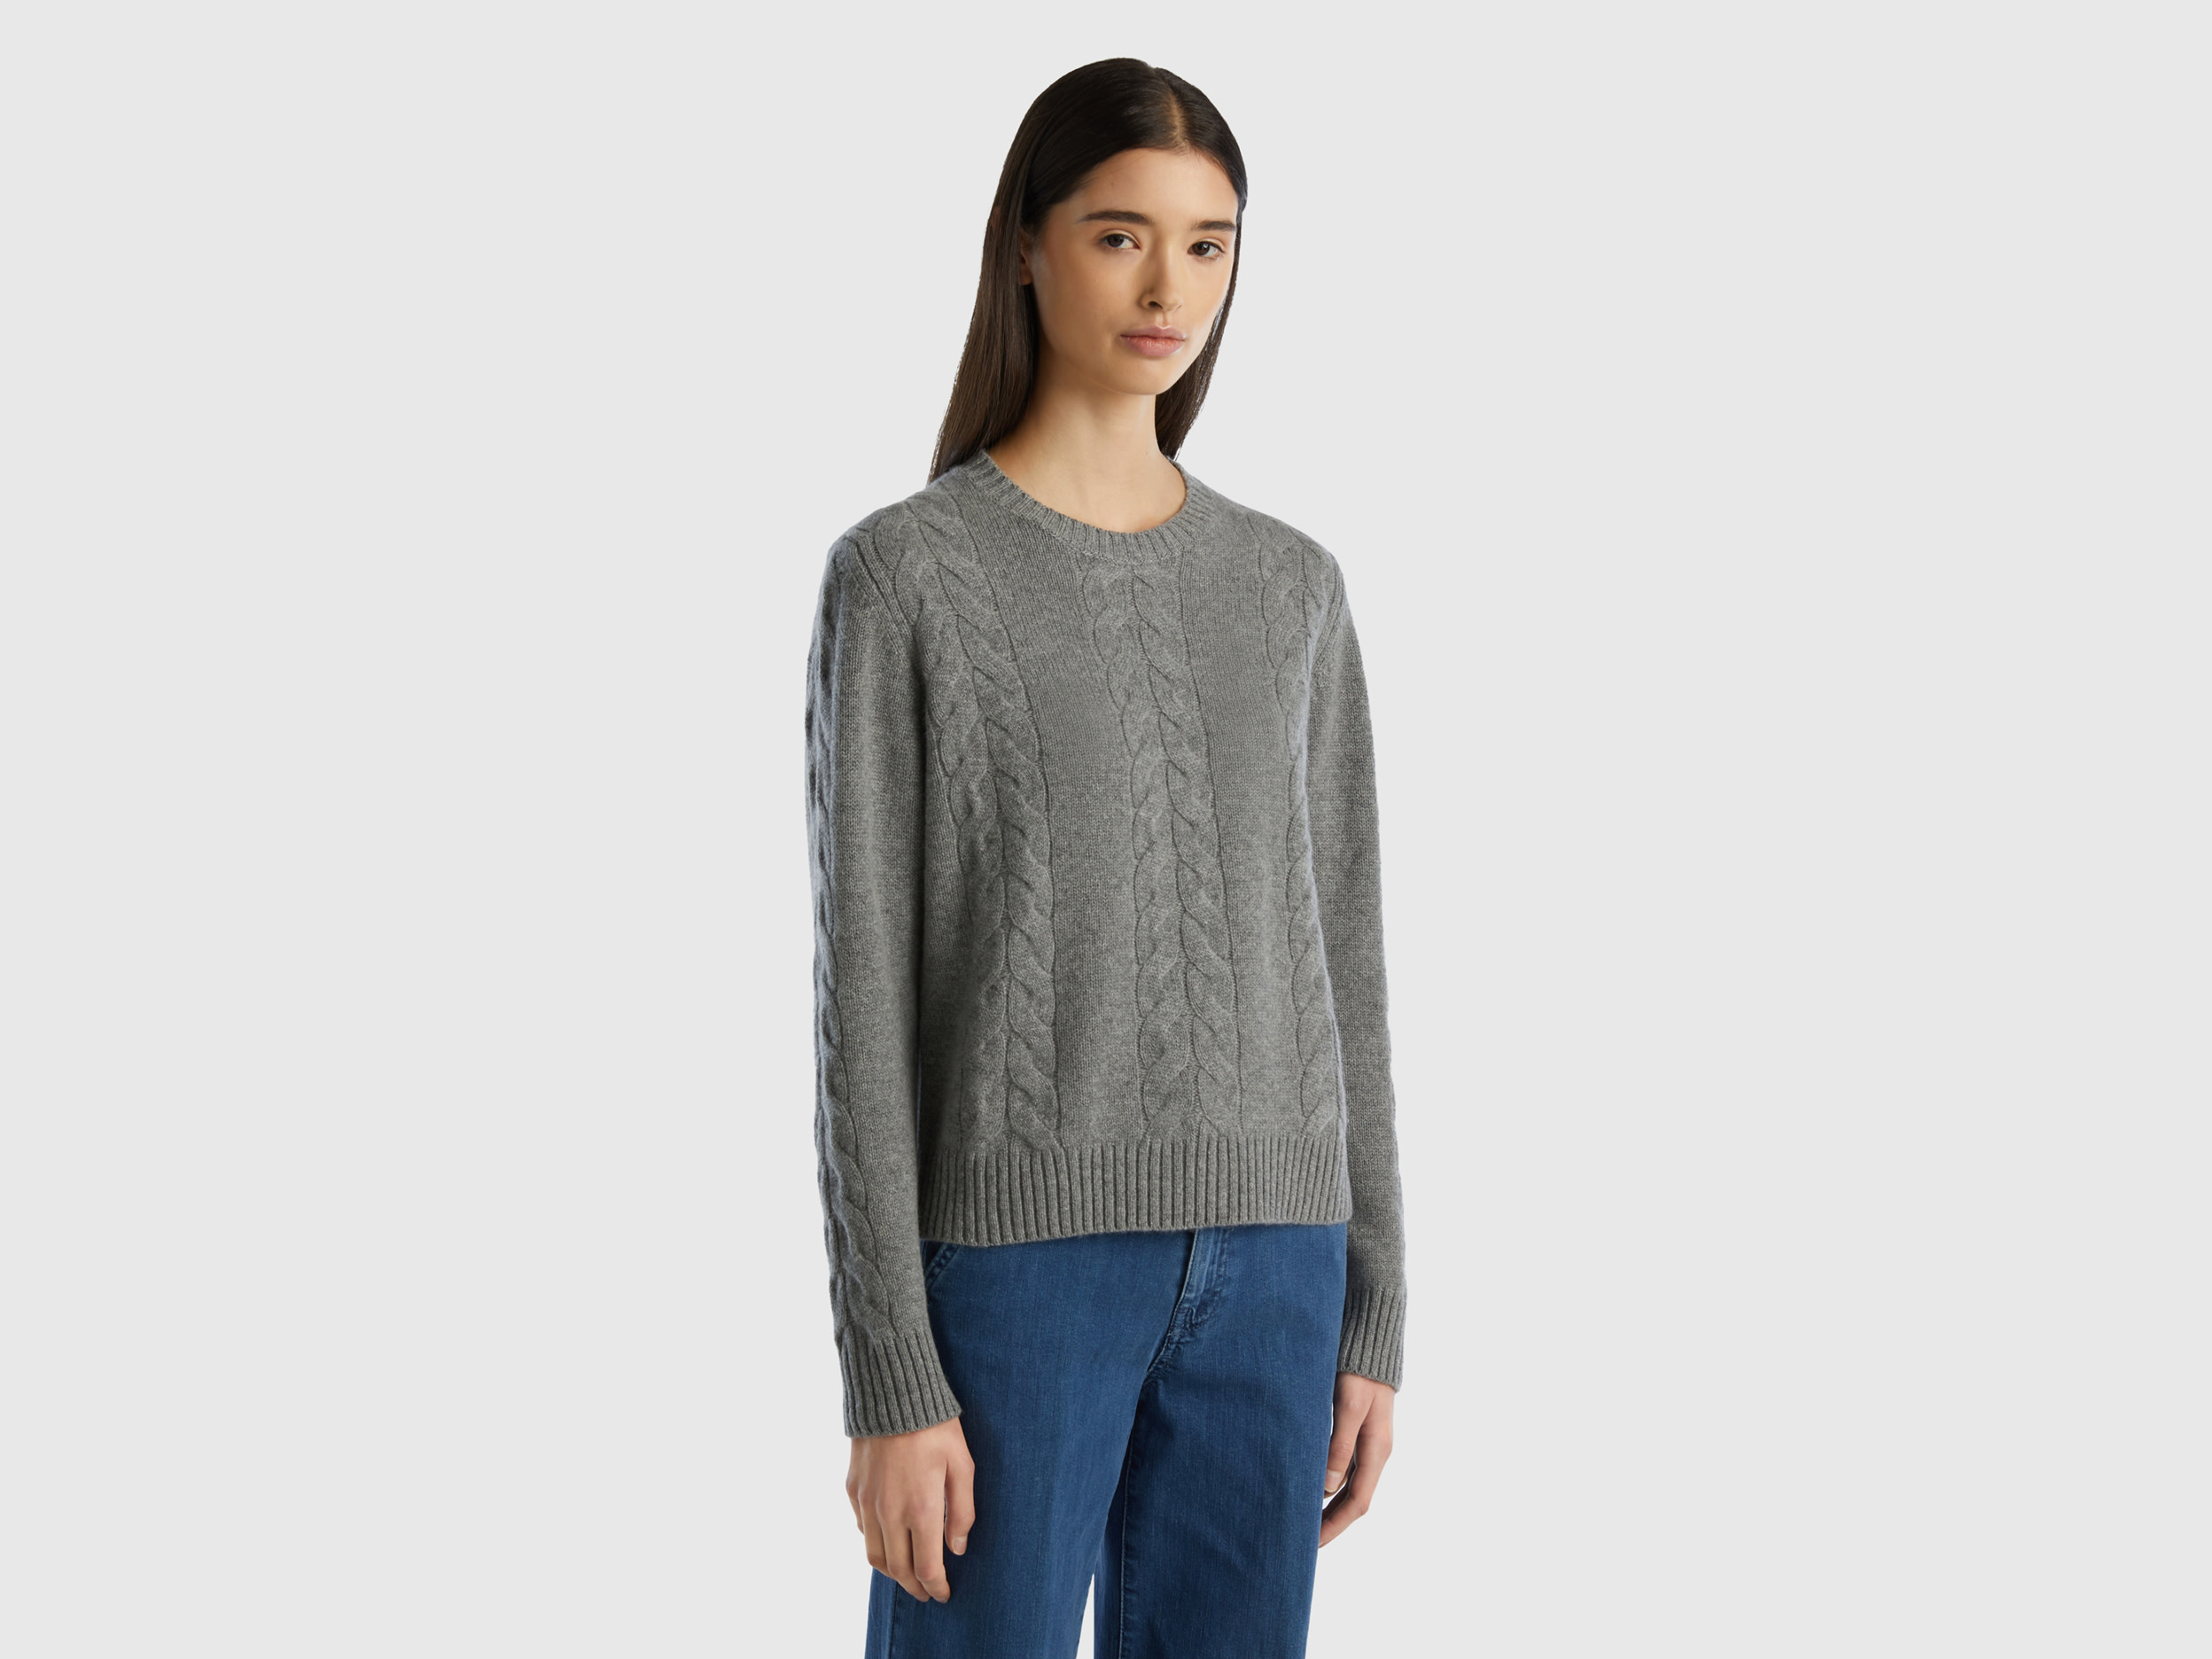 Benetton, Cable Knit Sweater In Pure Cashmere, size M, Dark Gray, Women